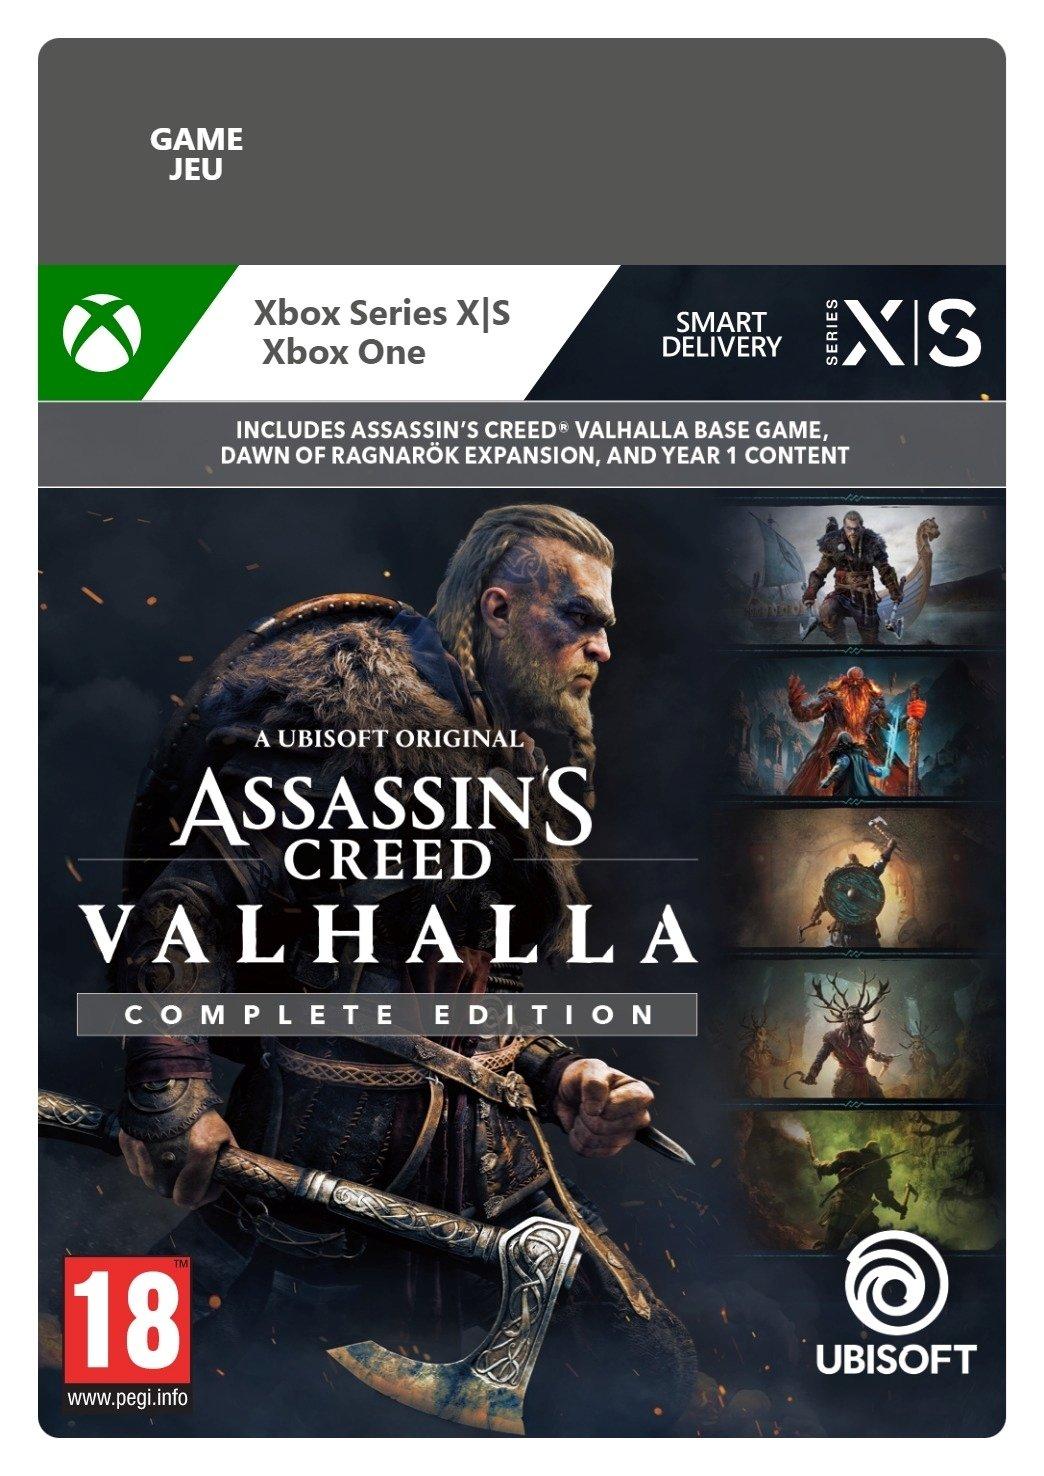 Assassin's Creed Valhalla Complete Edition - Xbox Series X/Xbox One - Game | G3Q-01352 (c68e92f1-06ff-4346-8e70-8ba2c9ebe671)